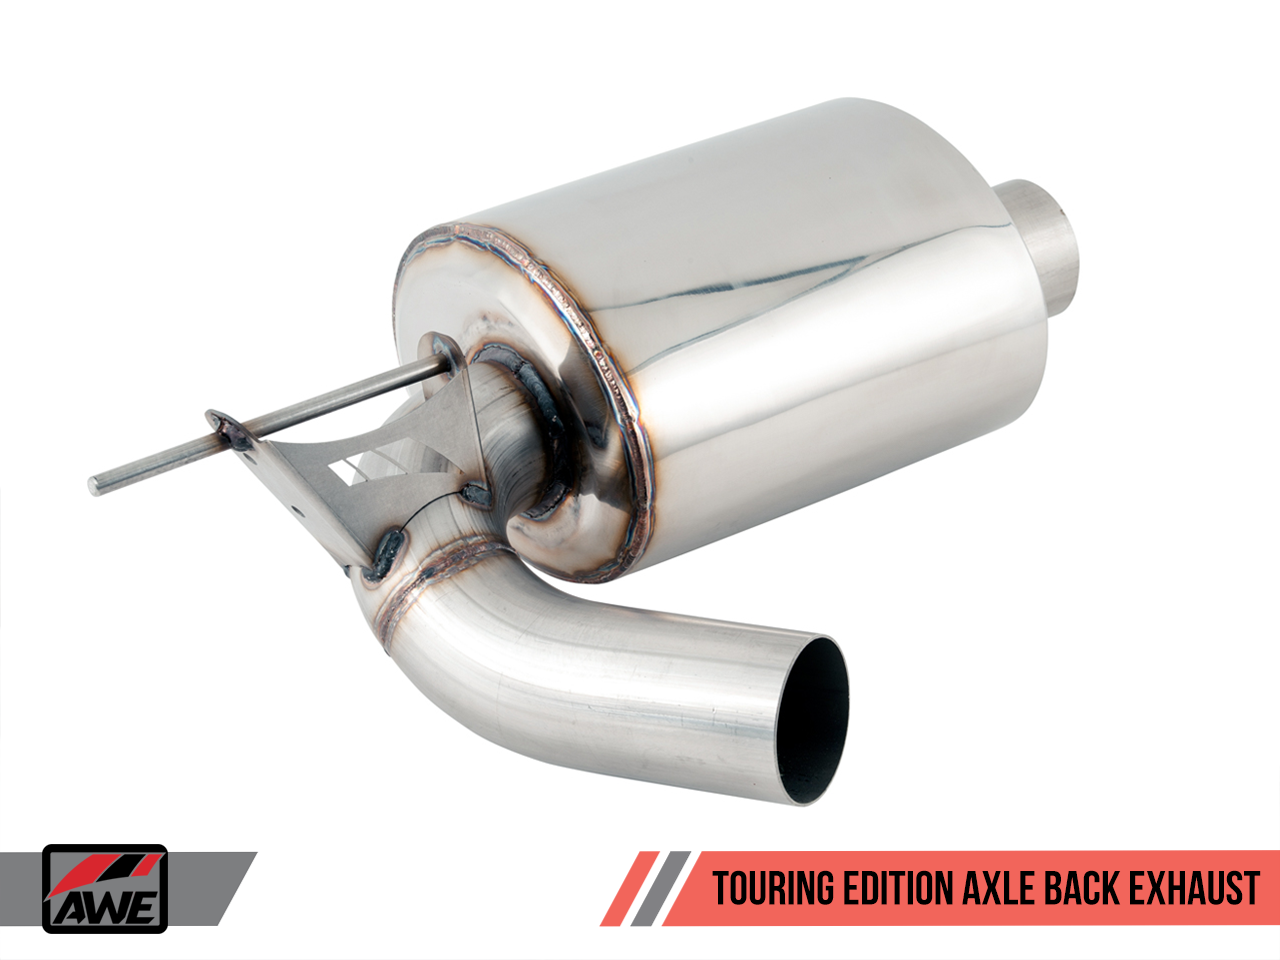 AWE Touring Edition Axle Back Exhaust for BMW F3X 335i/435i - Chrome Silver Tips (90mm) - 0